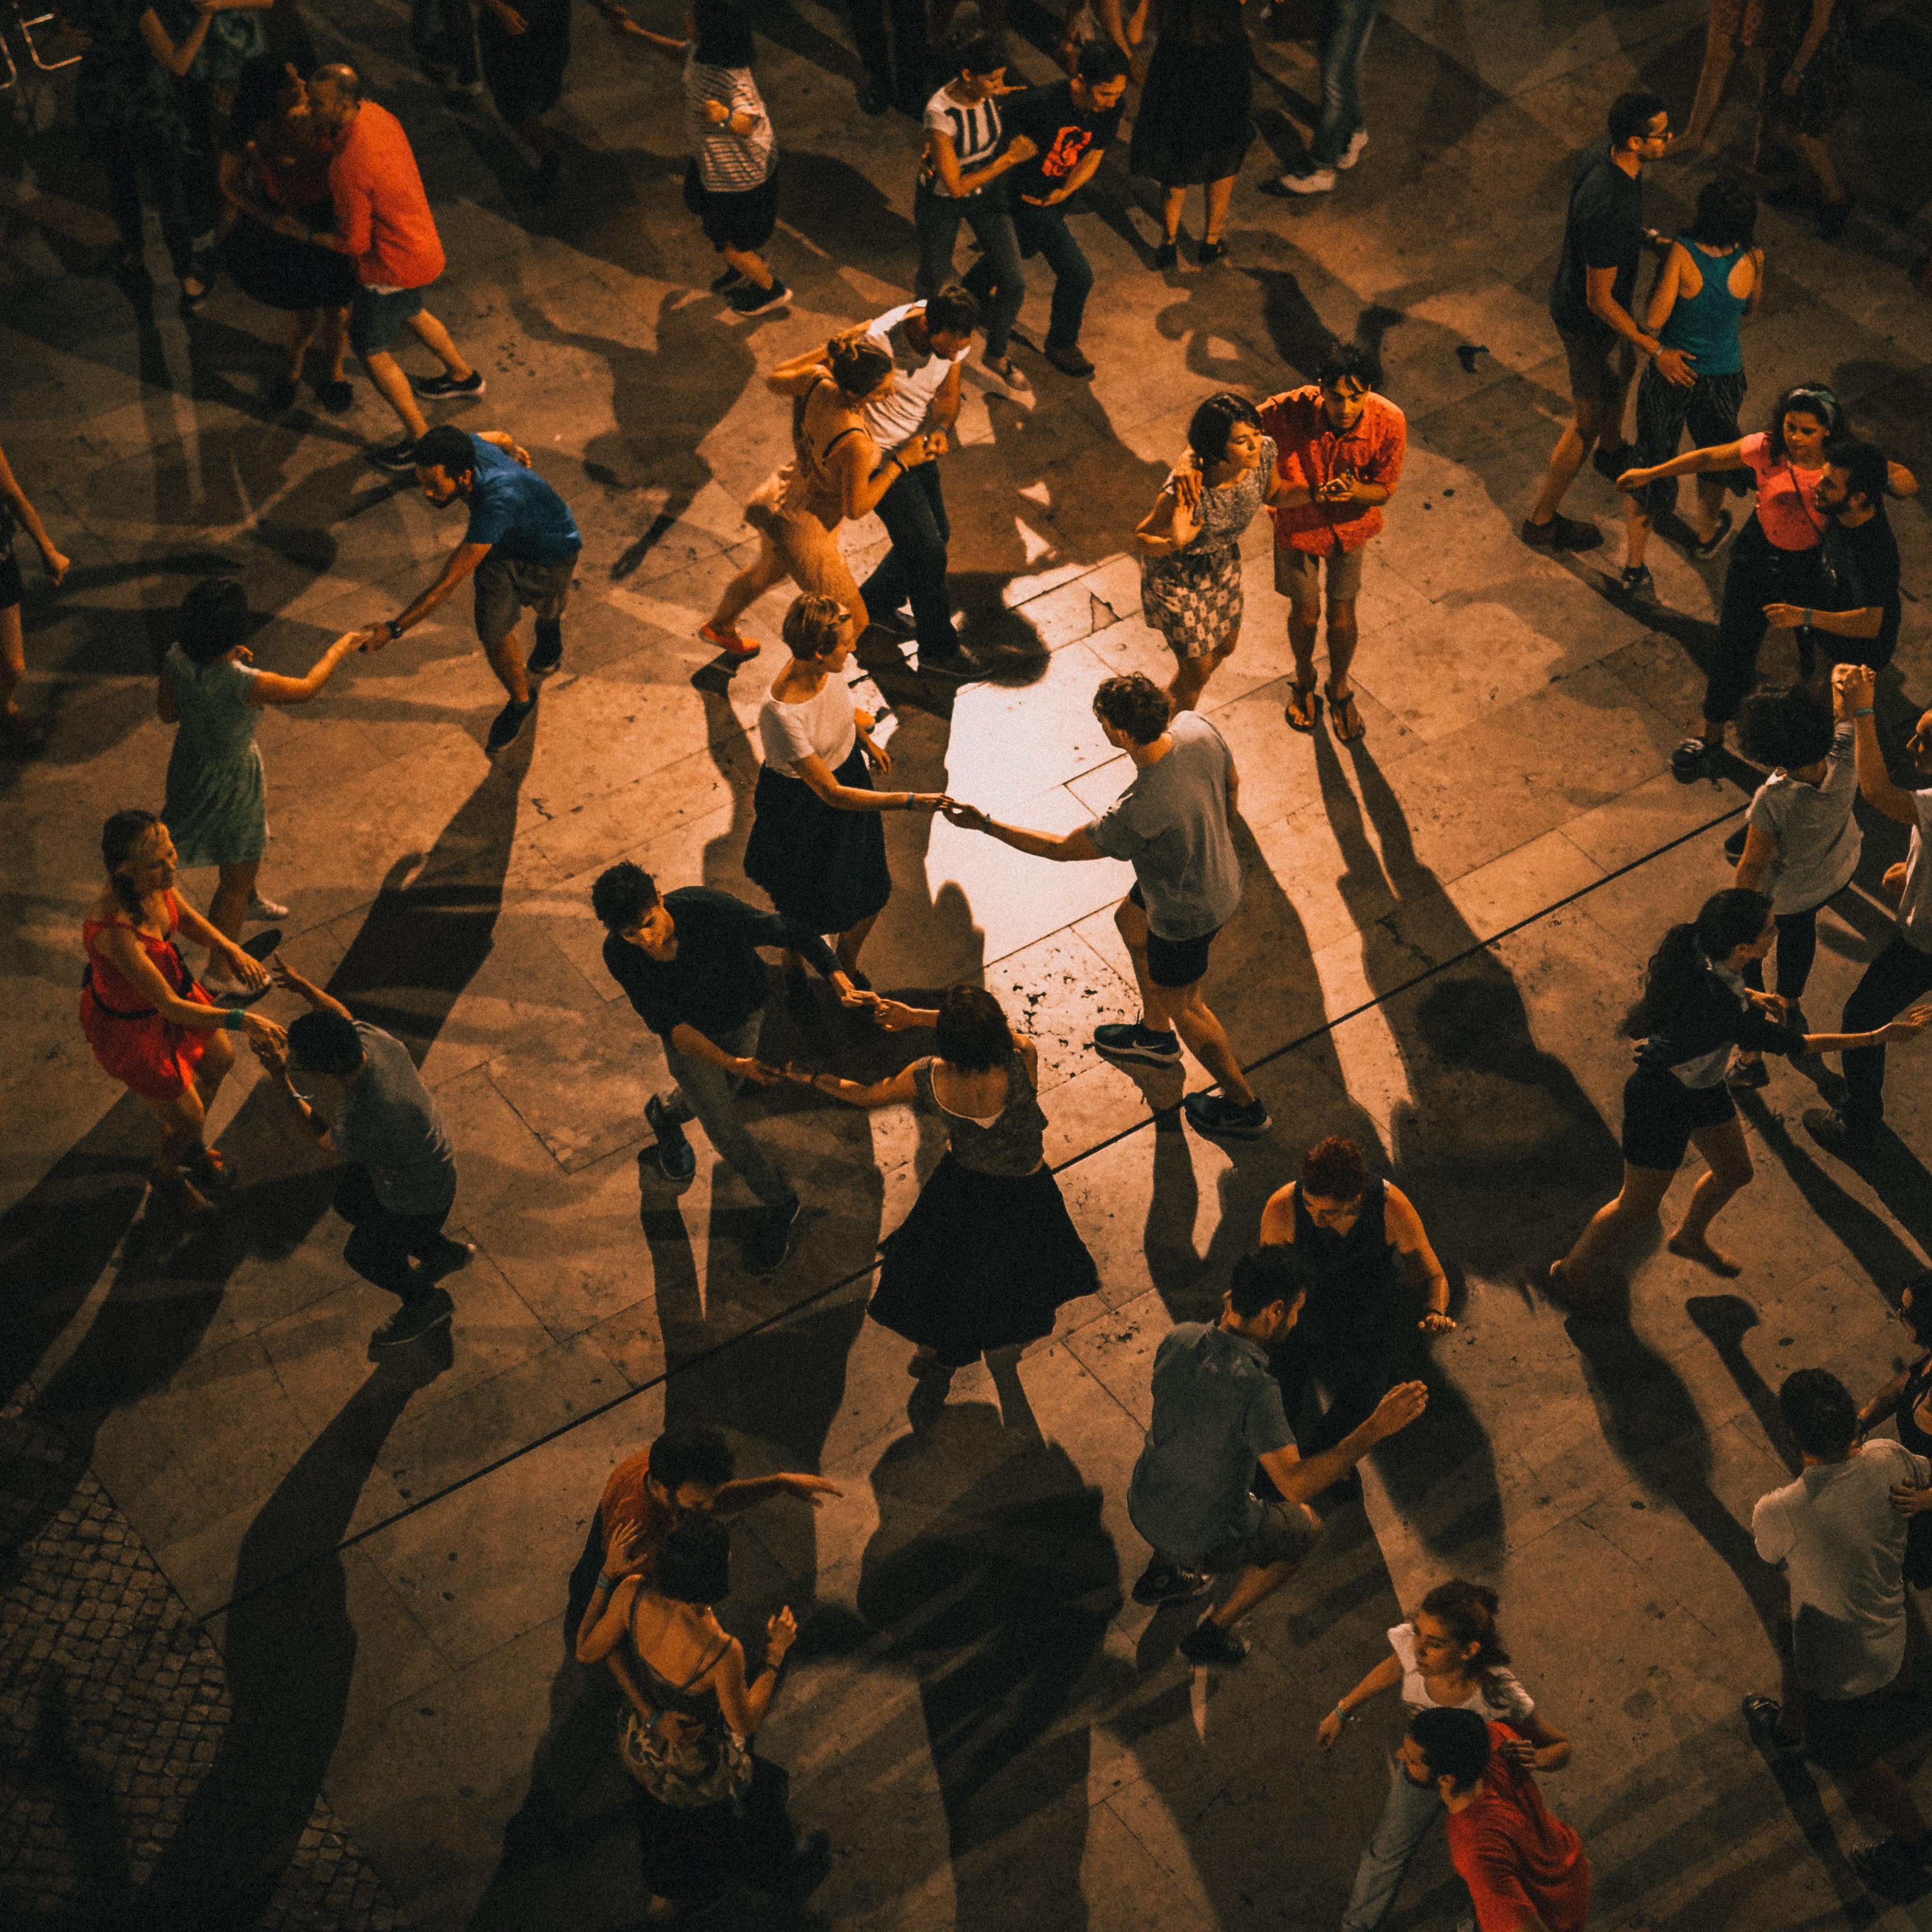 Couples dancing at night in the street.